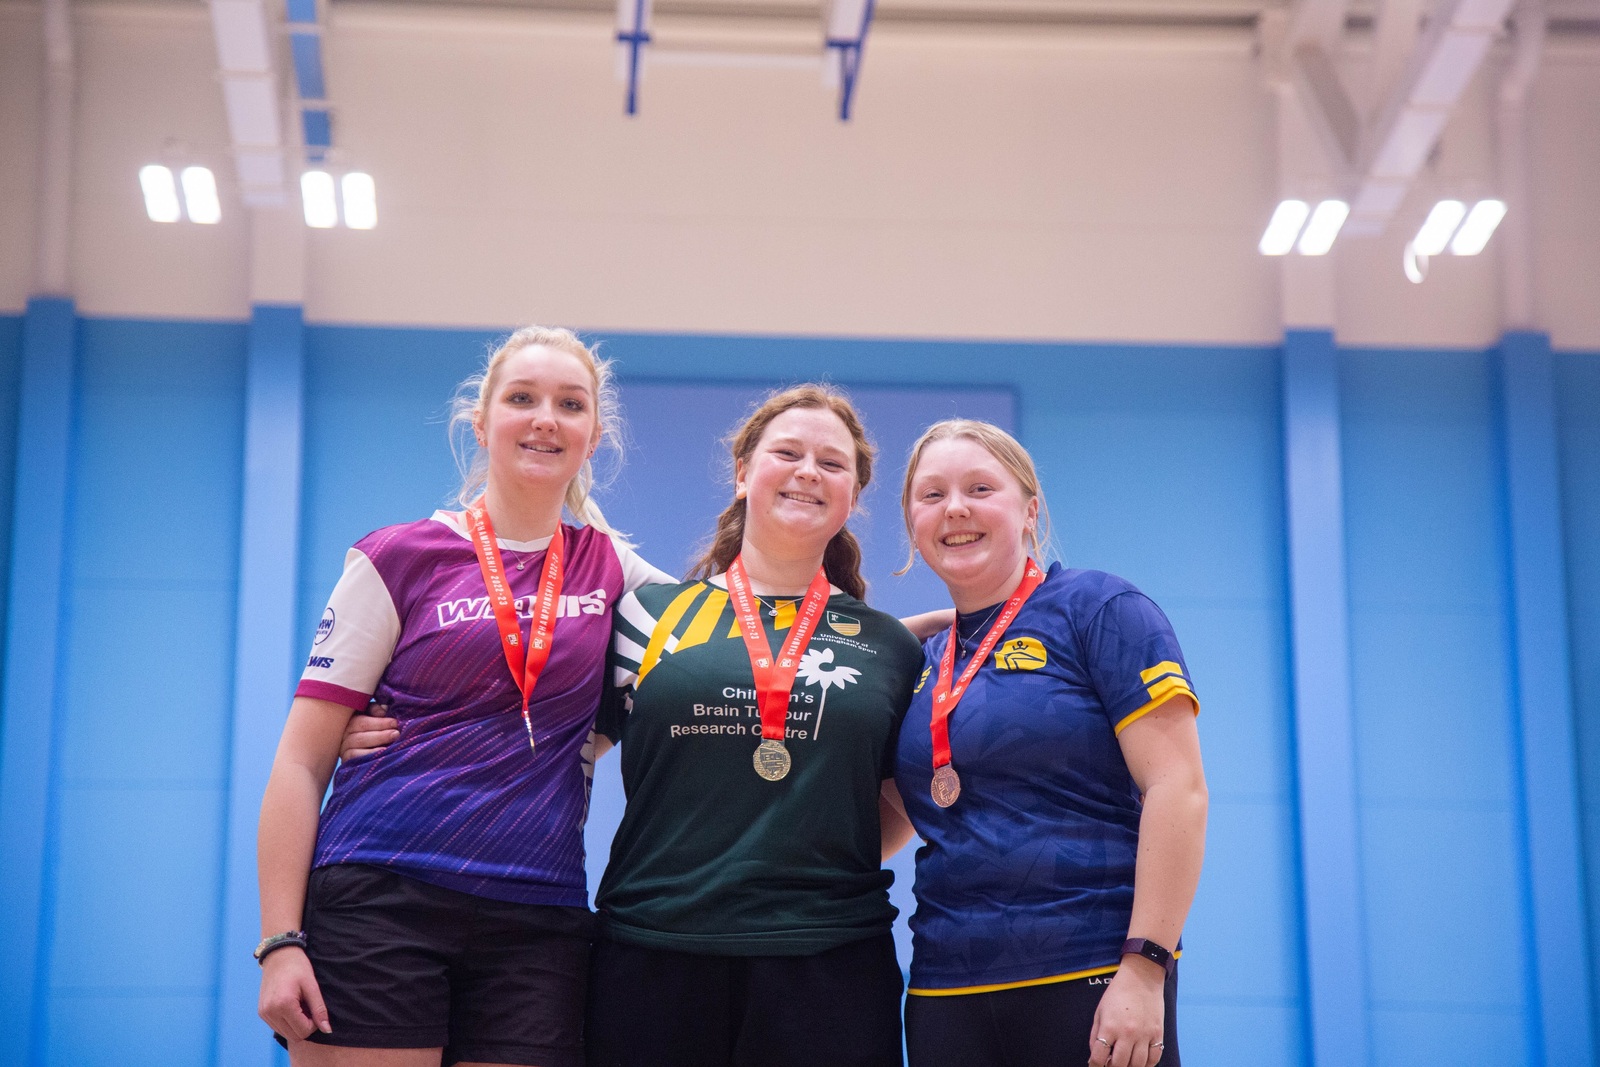 Three student archers wearing medals